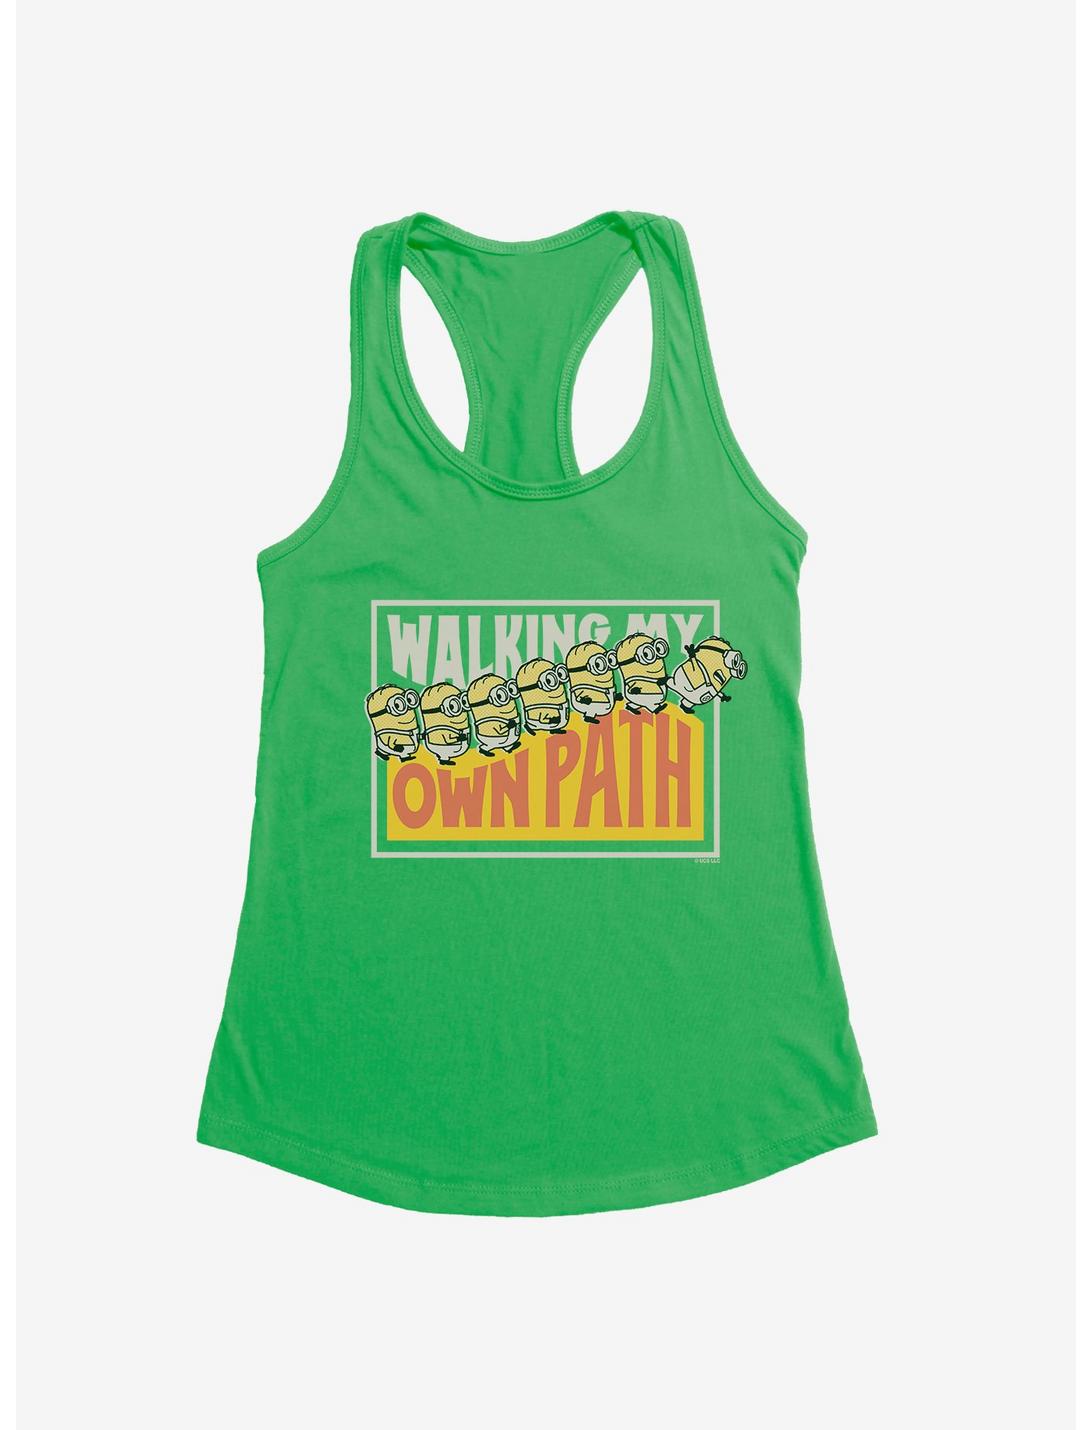 Minions On My Own Path Panel Womens Tank Top, KELLY GREEN, hi-res